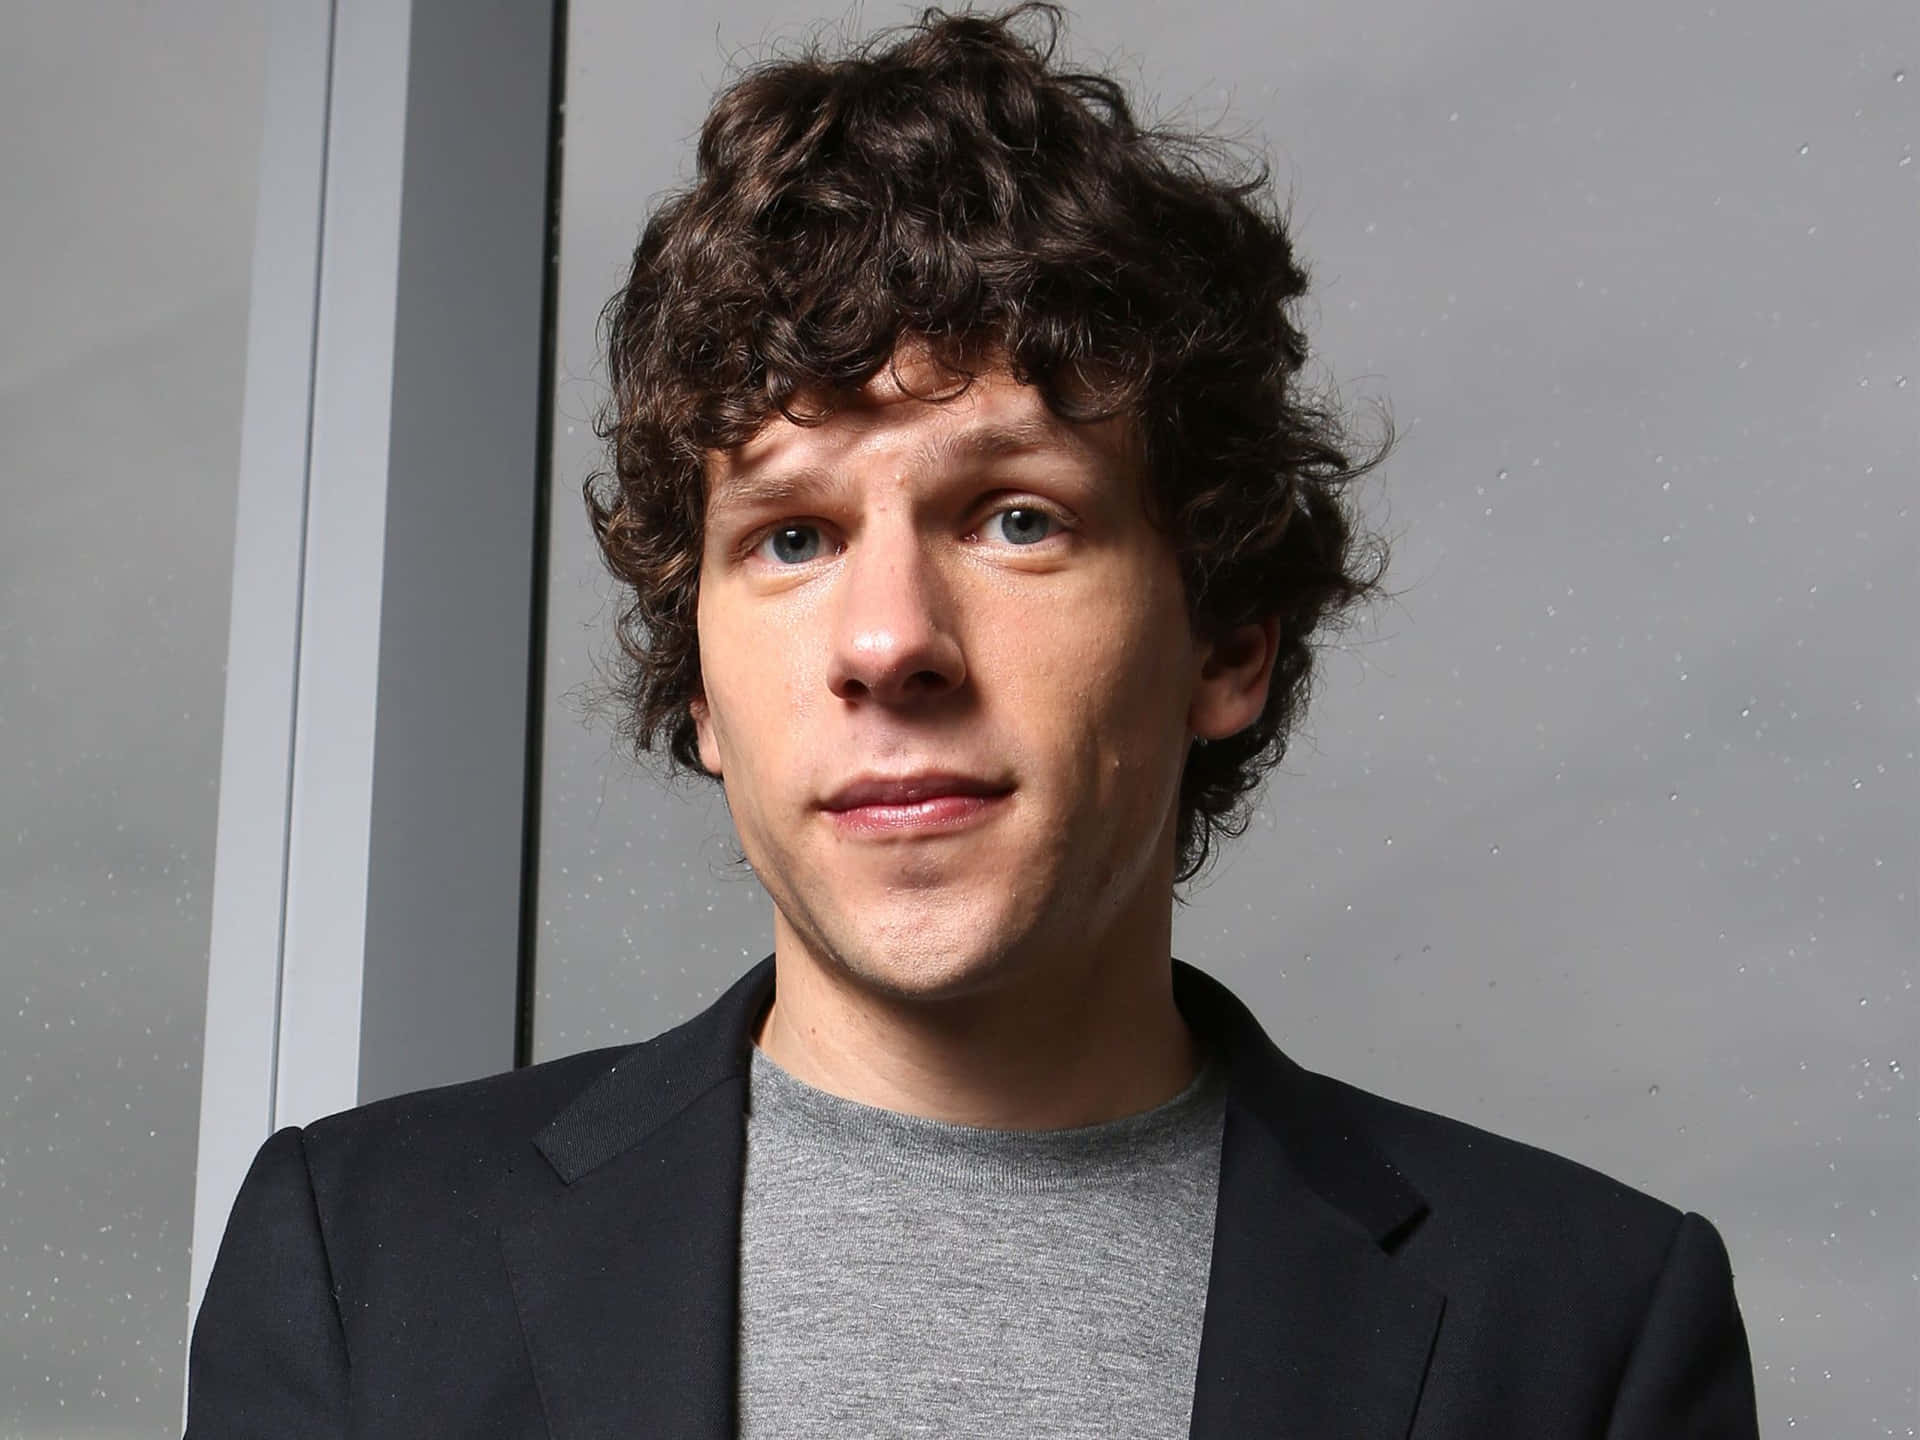 Jesseeisenberg Is An Actor Known For His Roles In Films Like 